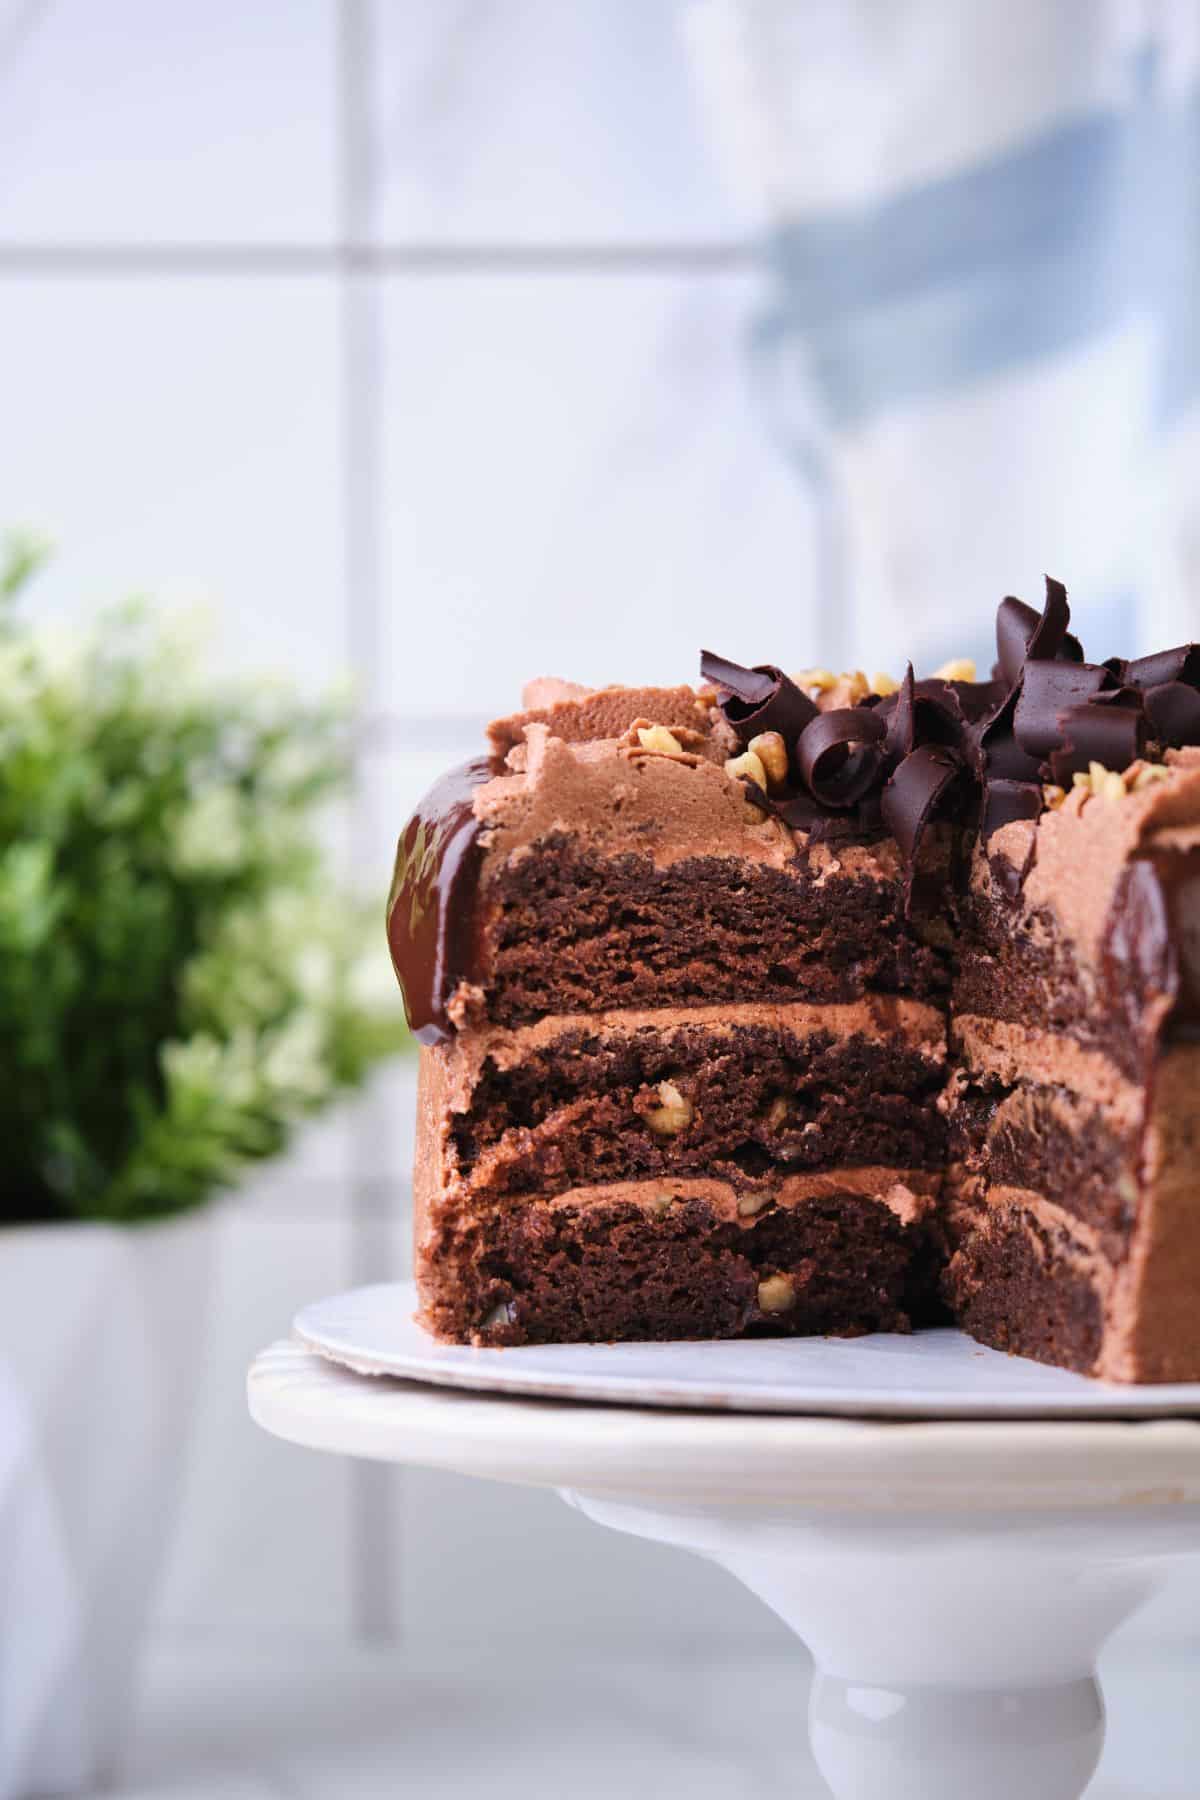 A chocolate walnut layer cake with several slices taken out.